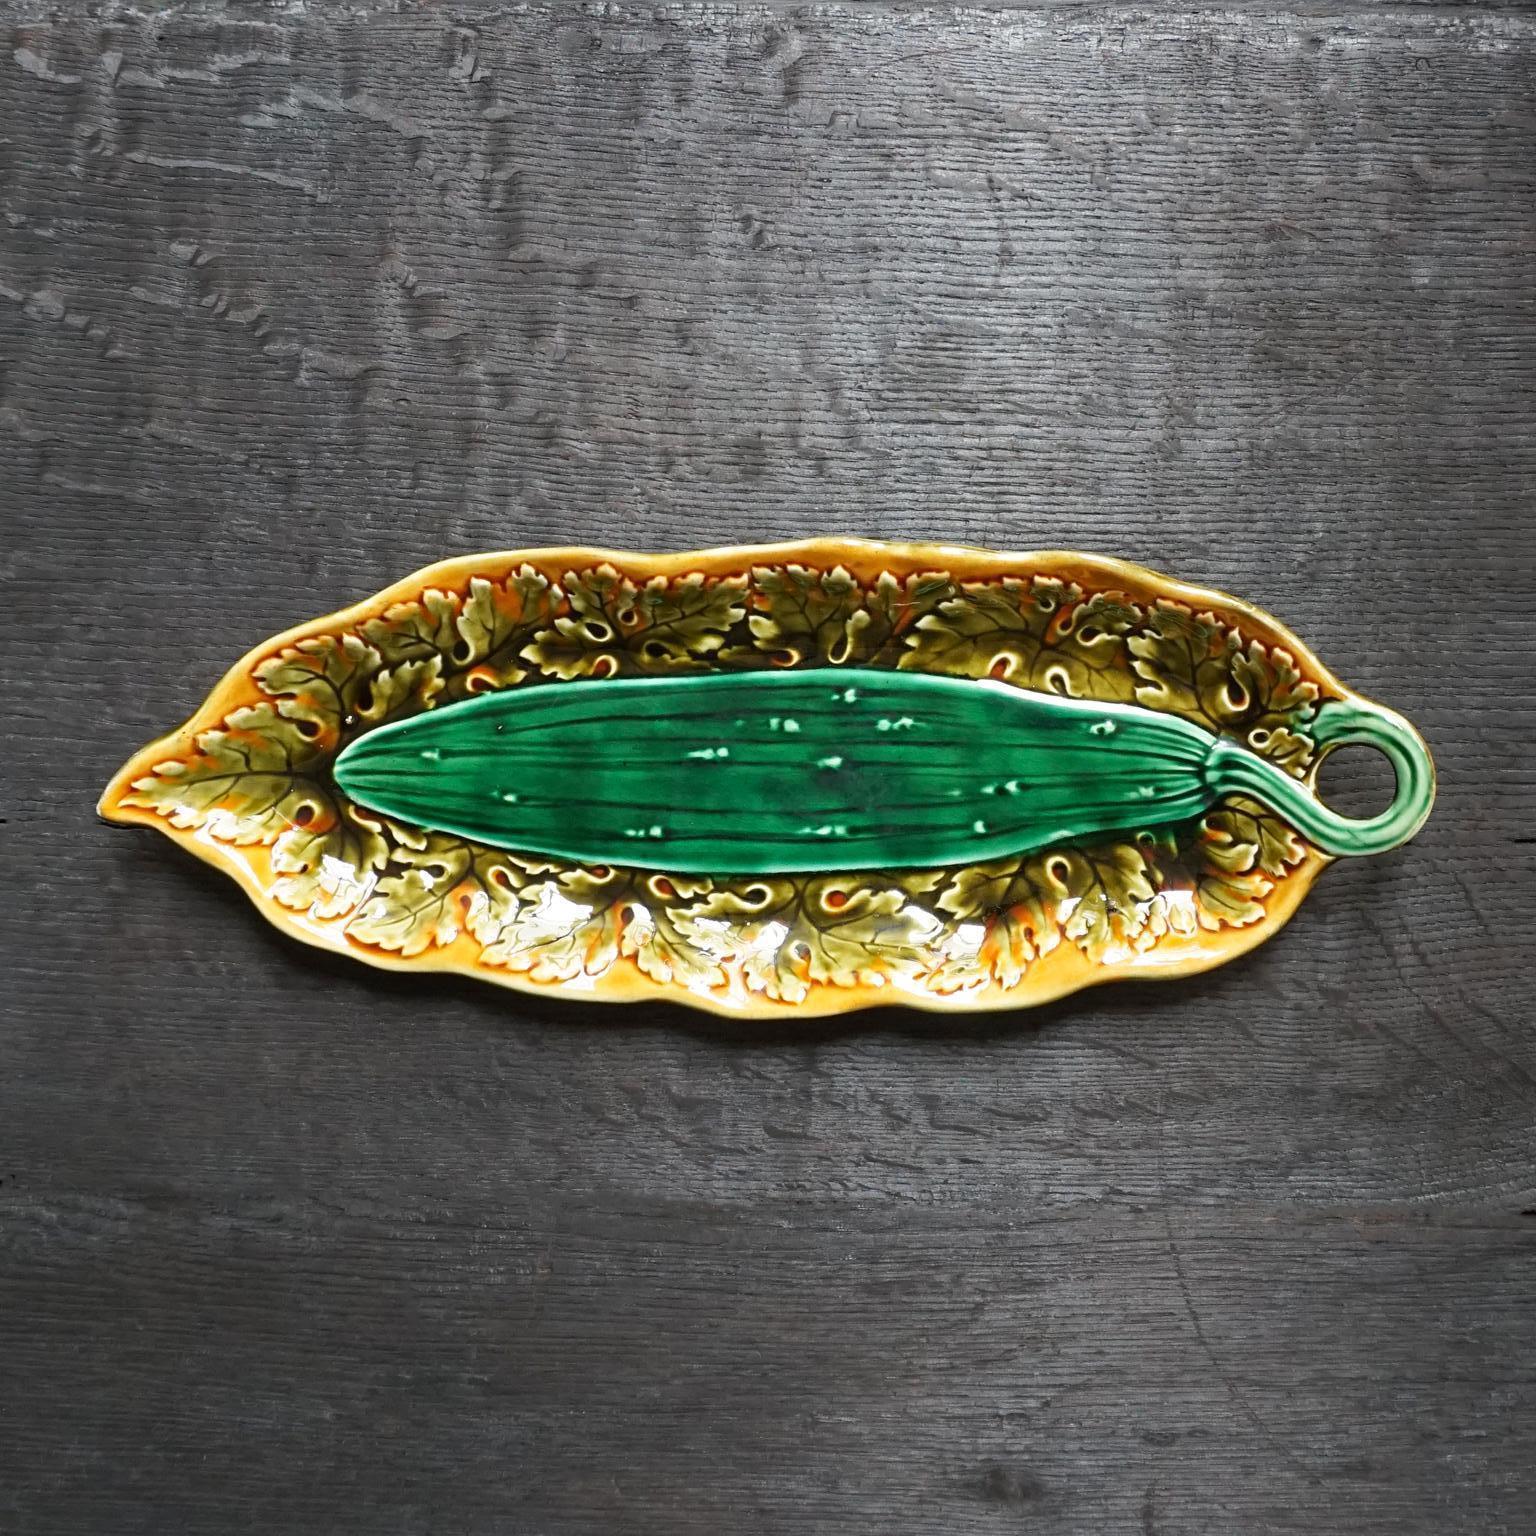 Magnificent rare Victorian vegetable serving Majolica dish made by the Ludwig Wessel at the Poppelsdorf Faience Factory in Bonn, Germany.
The dish is made in a Classic Art Nouveau style, designed by Wessel at the height of their finest Majolica